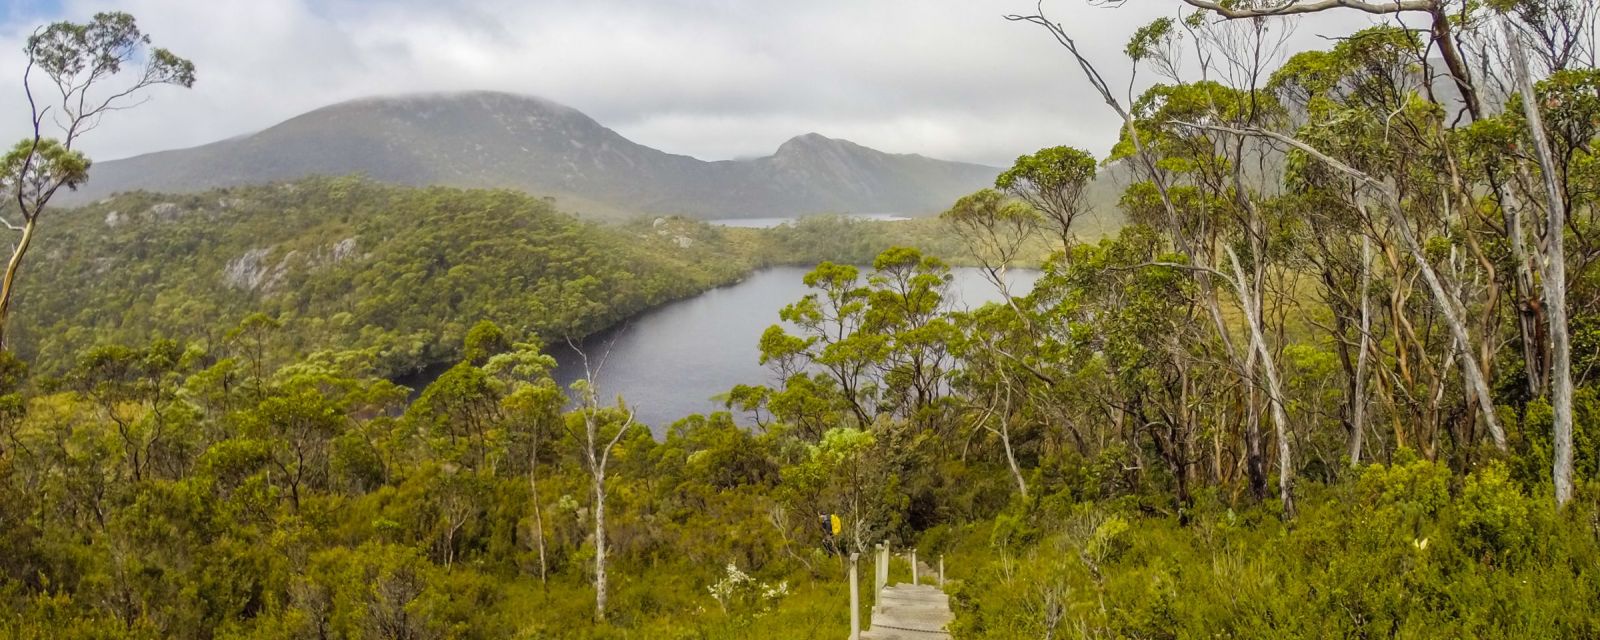 Cradle Mountain - 5 Hikes and Walks + Wildlife Guide